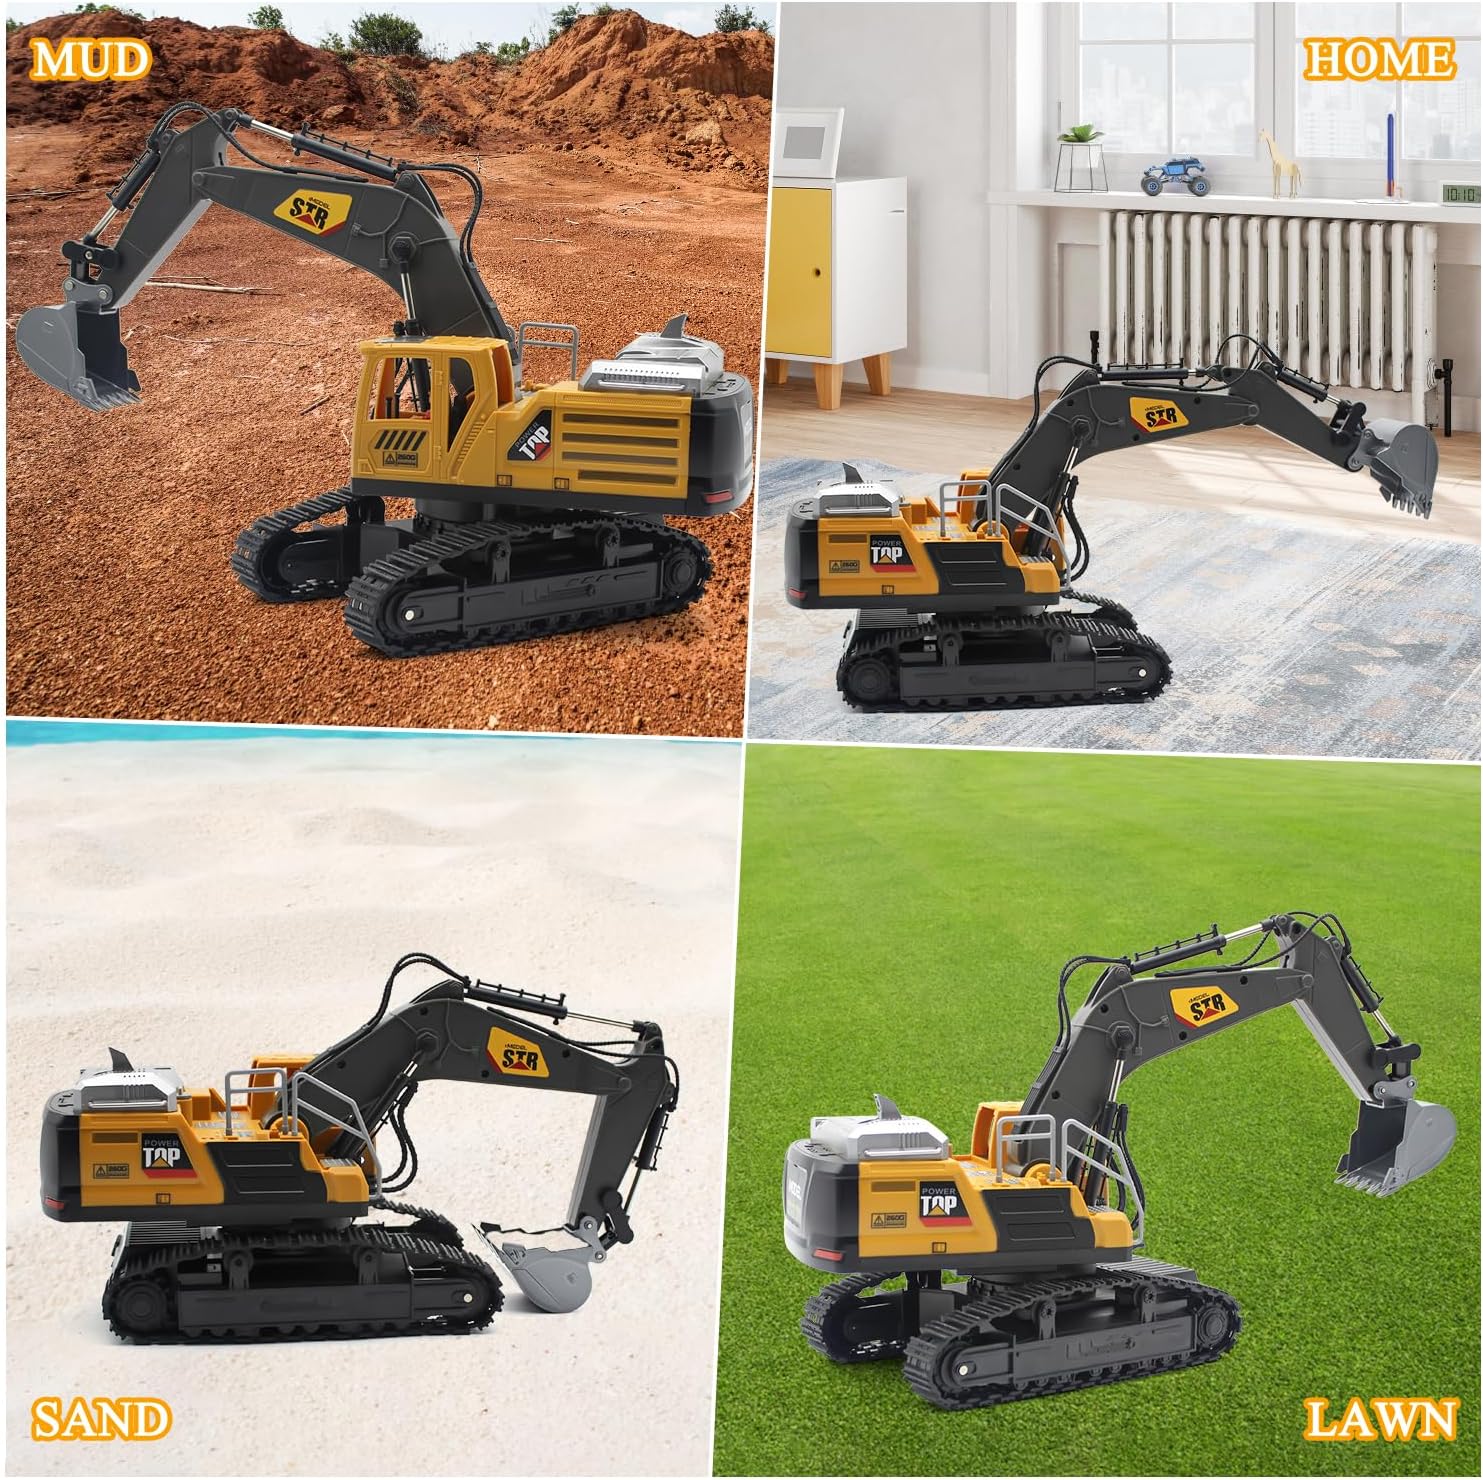 Revolutionizing Playtime: The Fistone 14 Channel Remote Control Excavator Toy Review